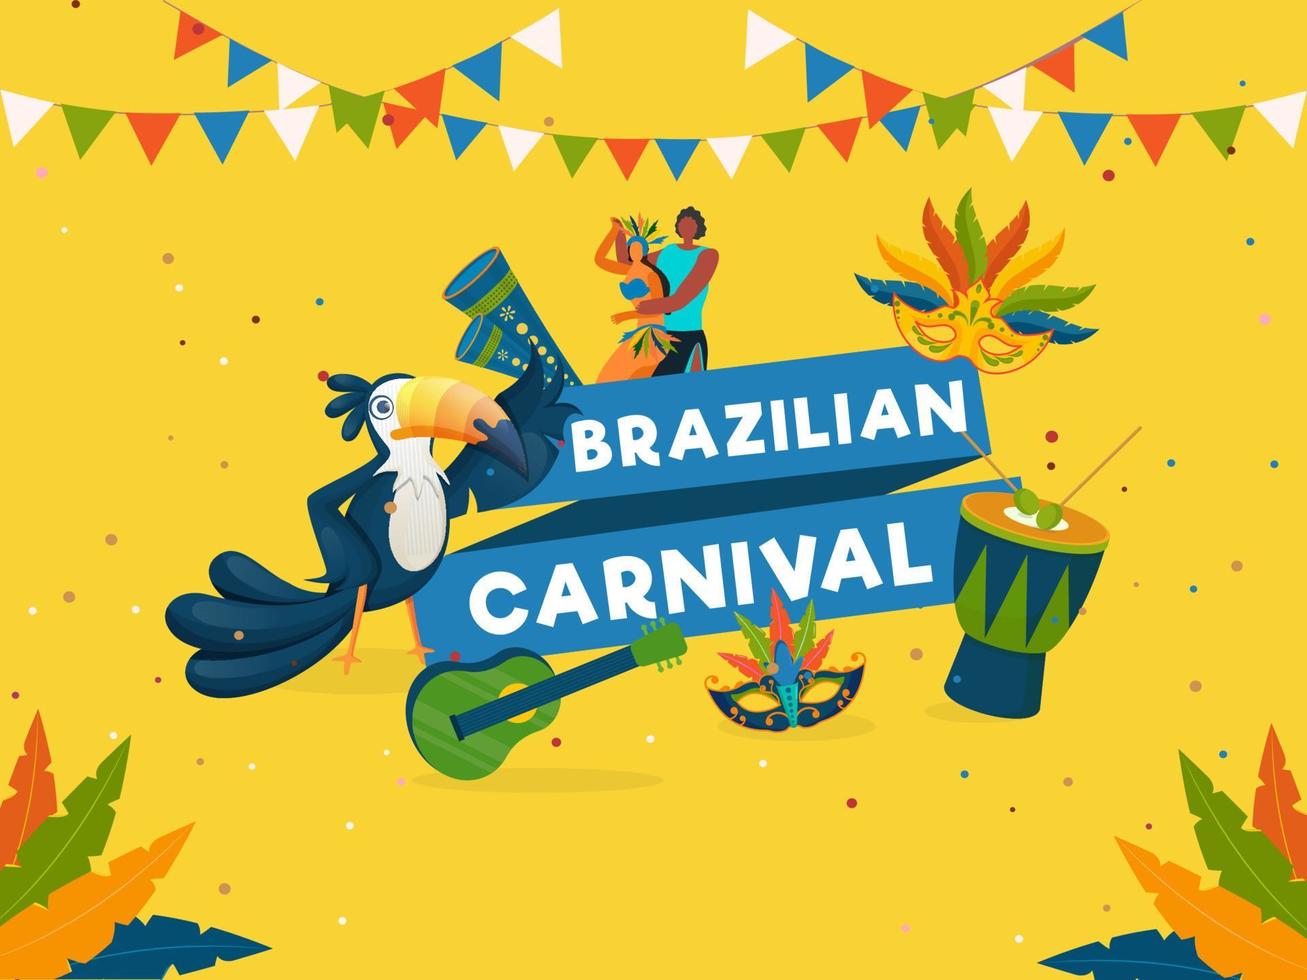 Brazilian Carnival Celebration Concept With Cartoon Couple Character, Toucan Bird, Party Masks, Music Instruments And Bunting Flags Decorated On Yellow Background. vector